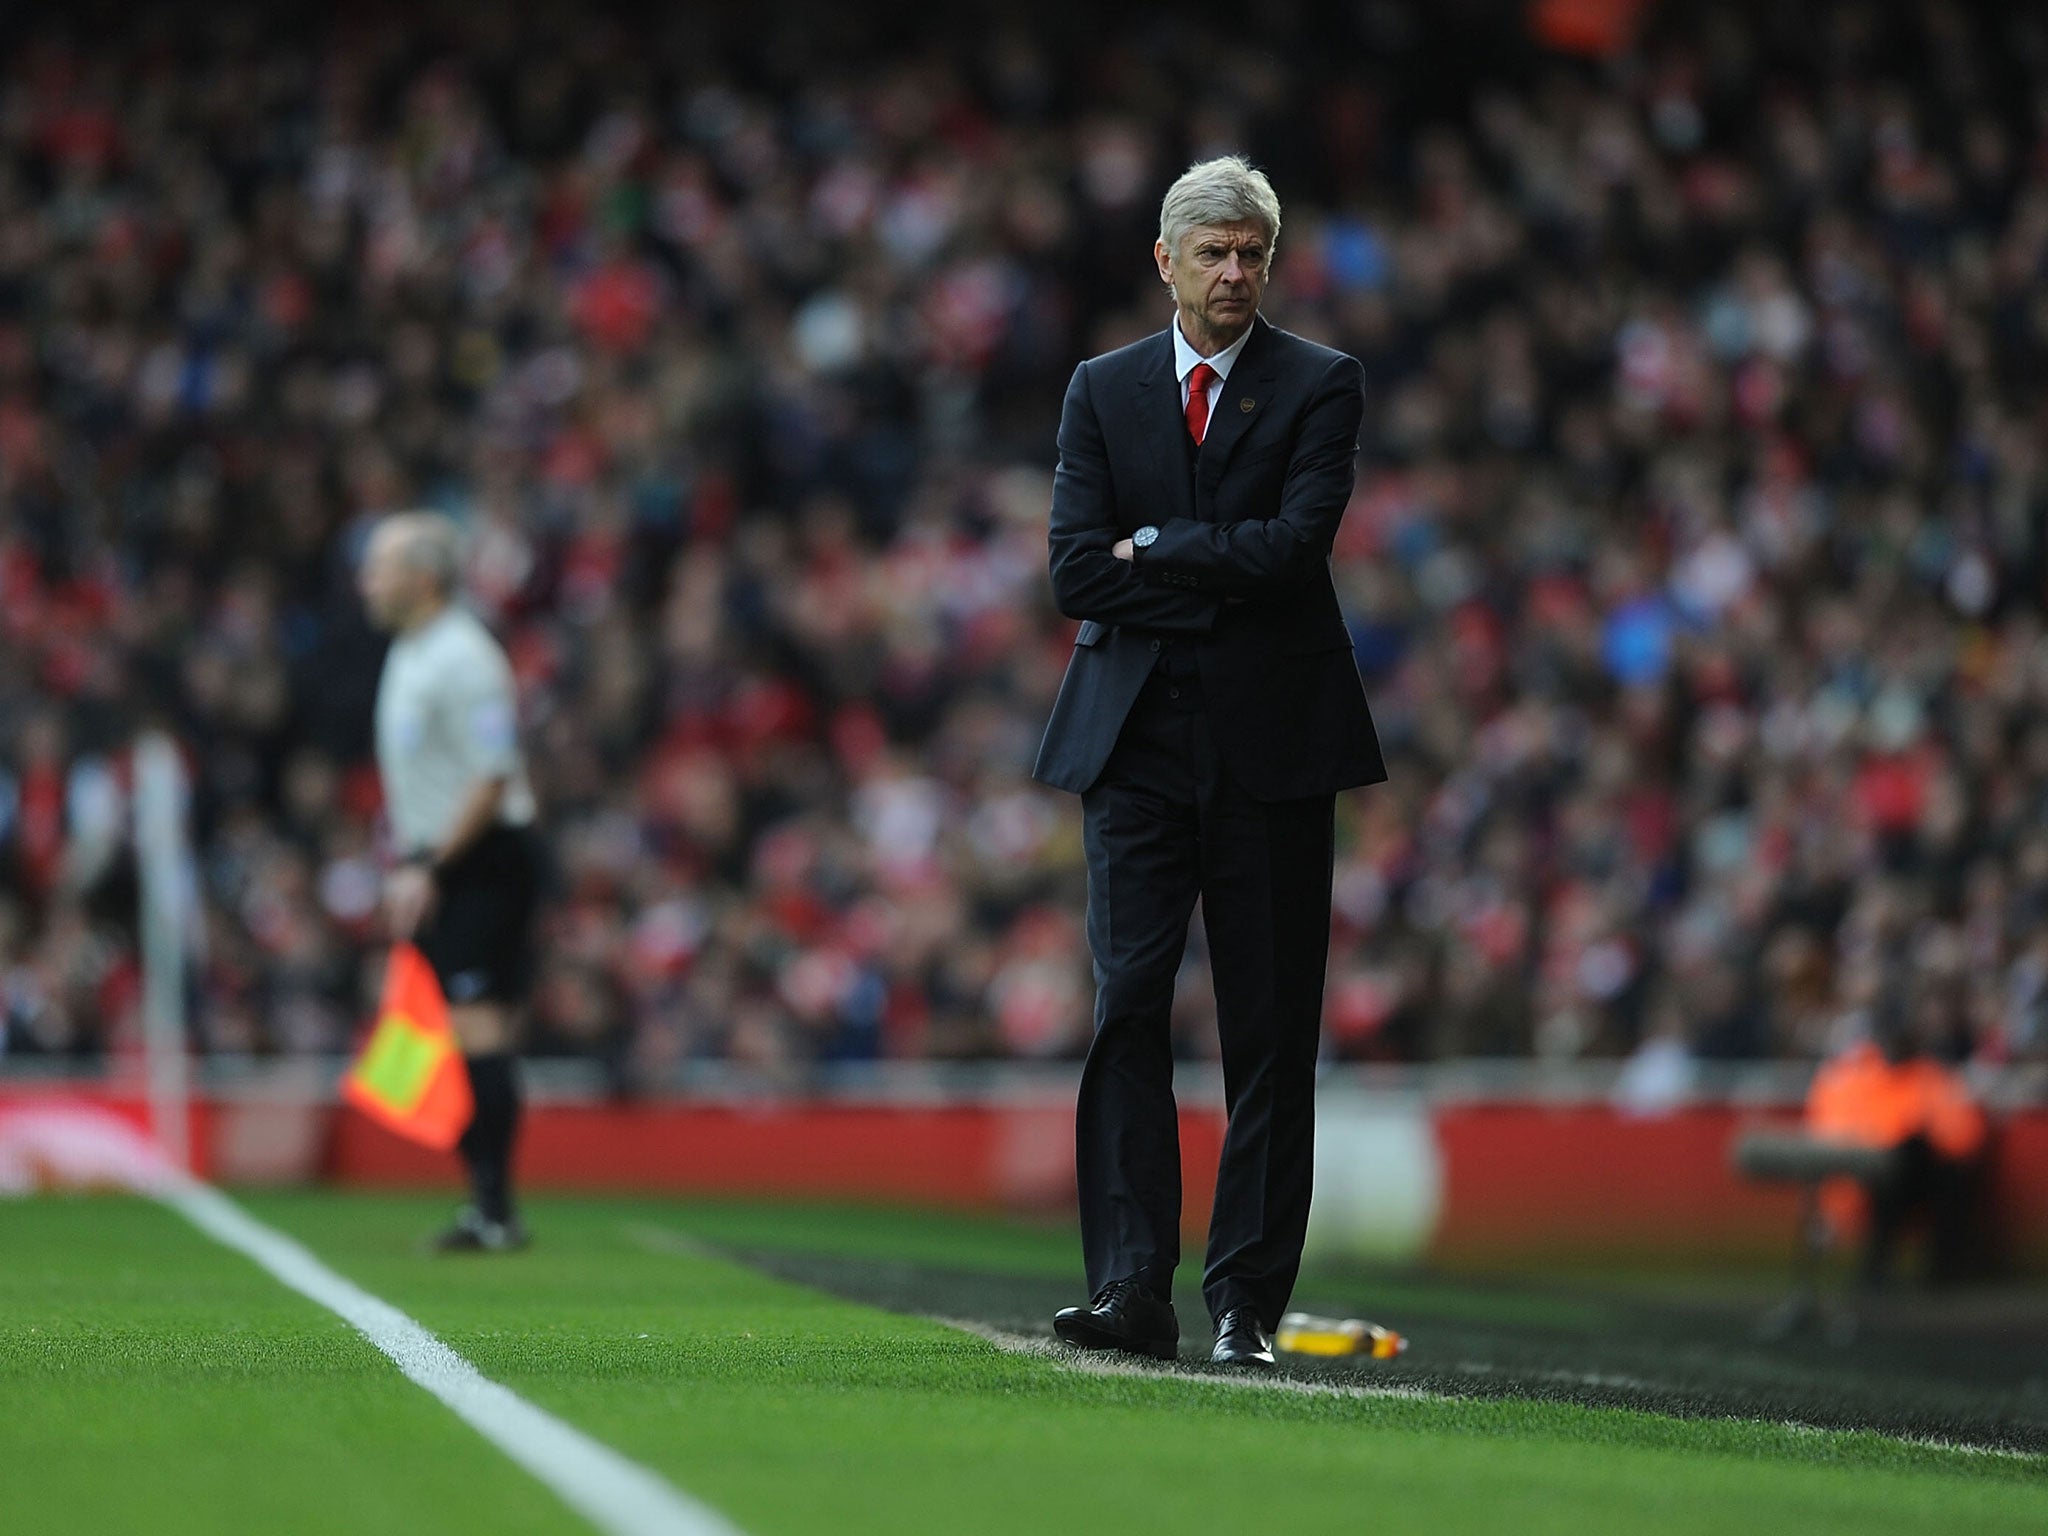 Arsene Wenger reacts during the game against Stoke